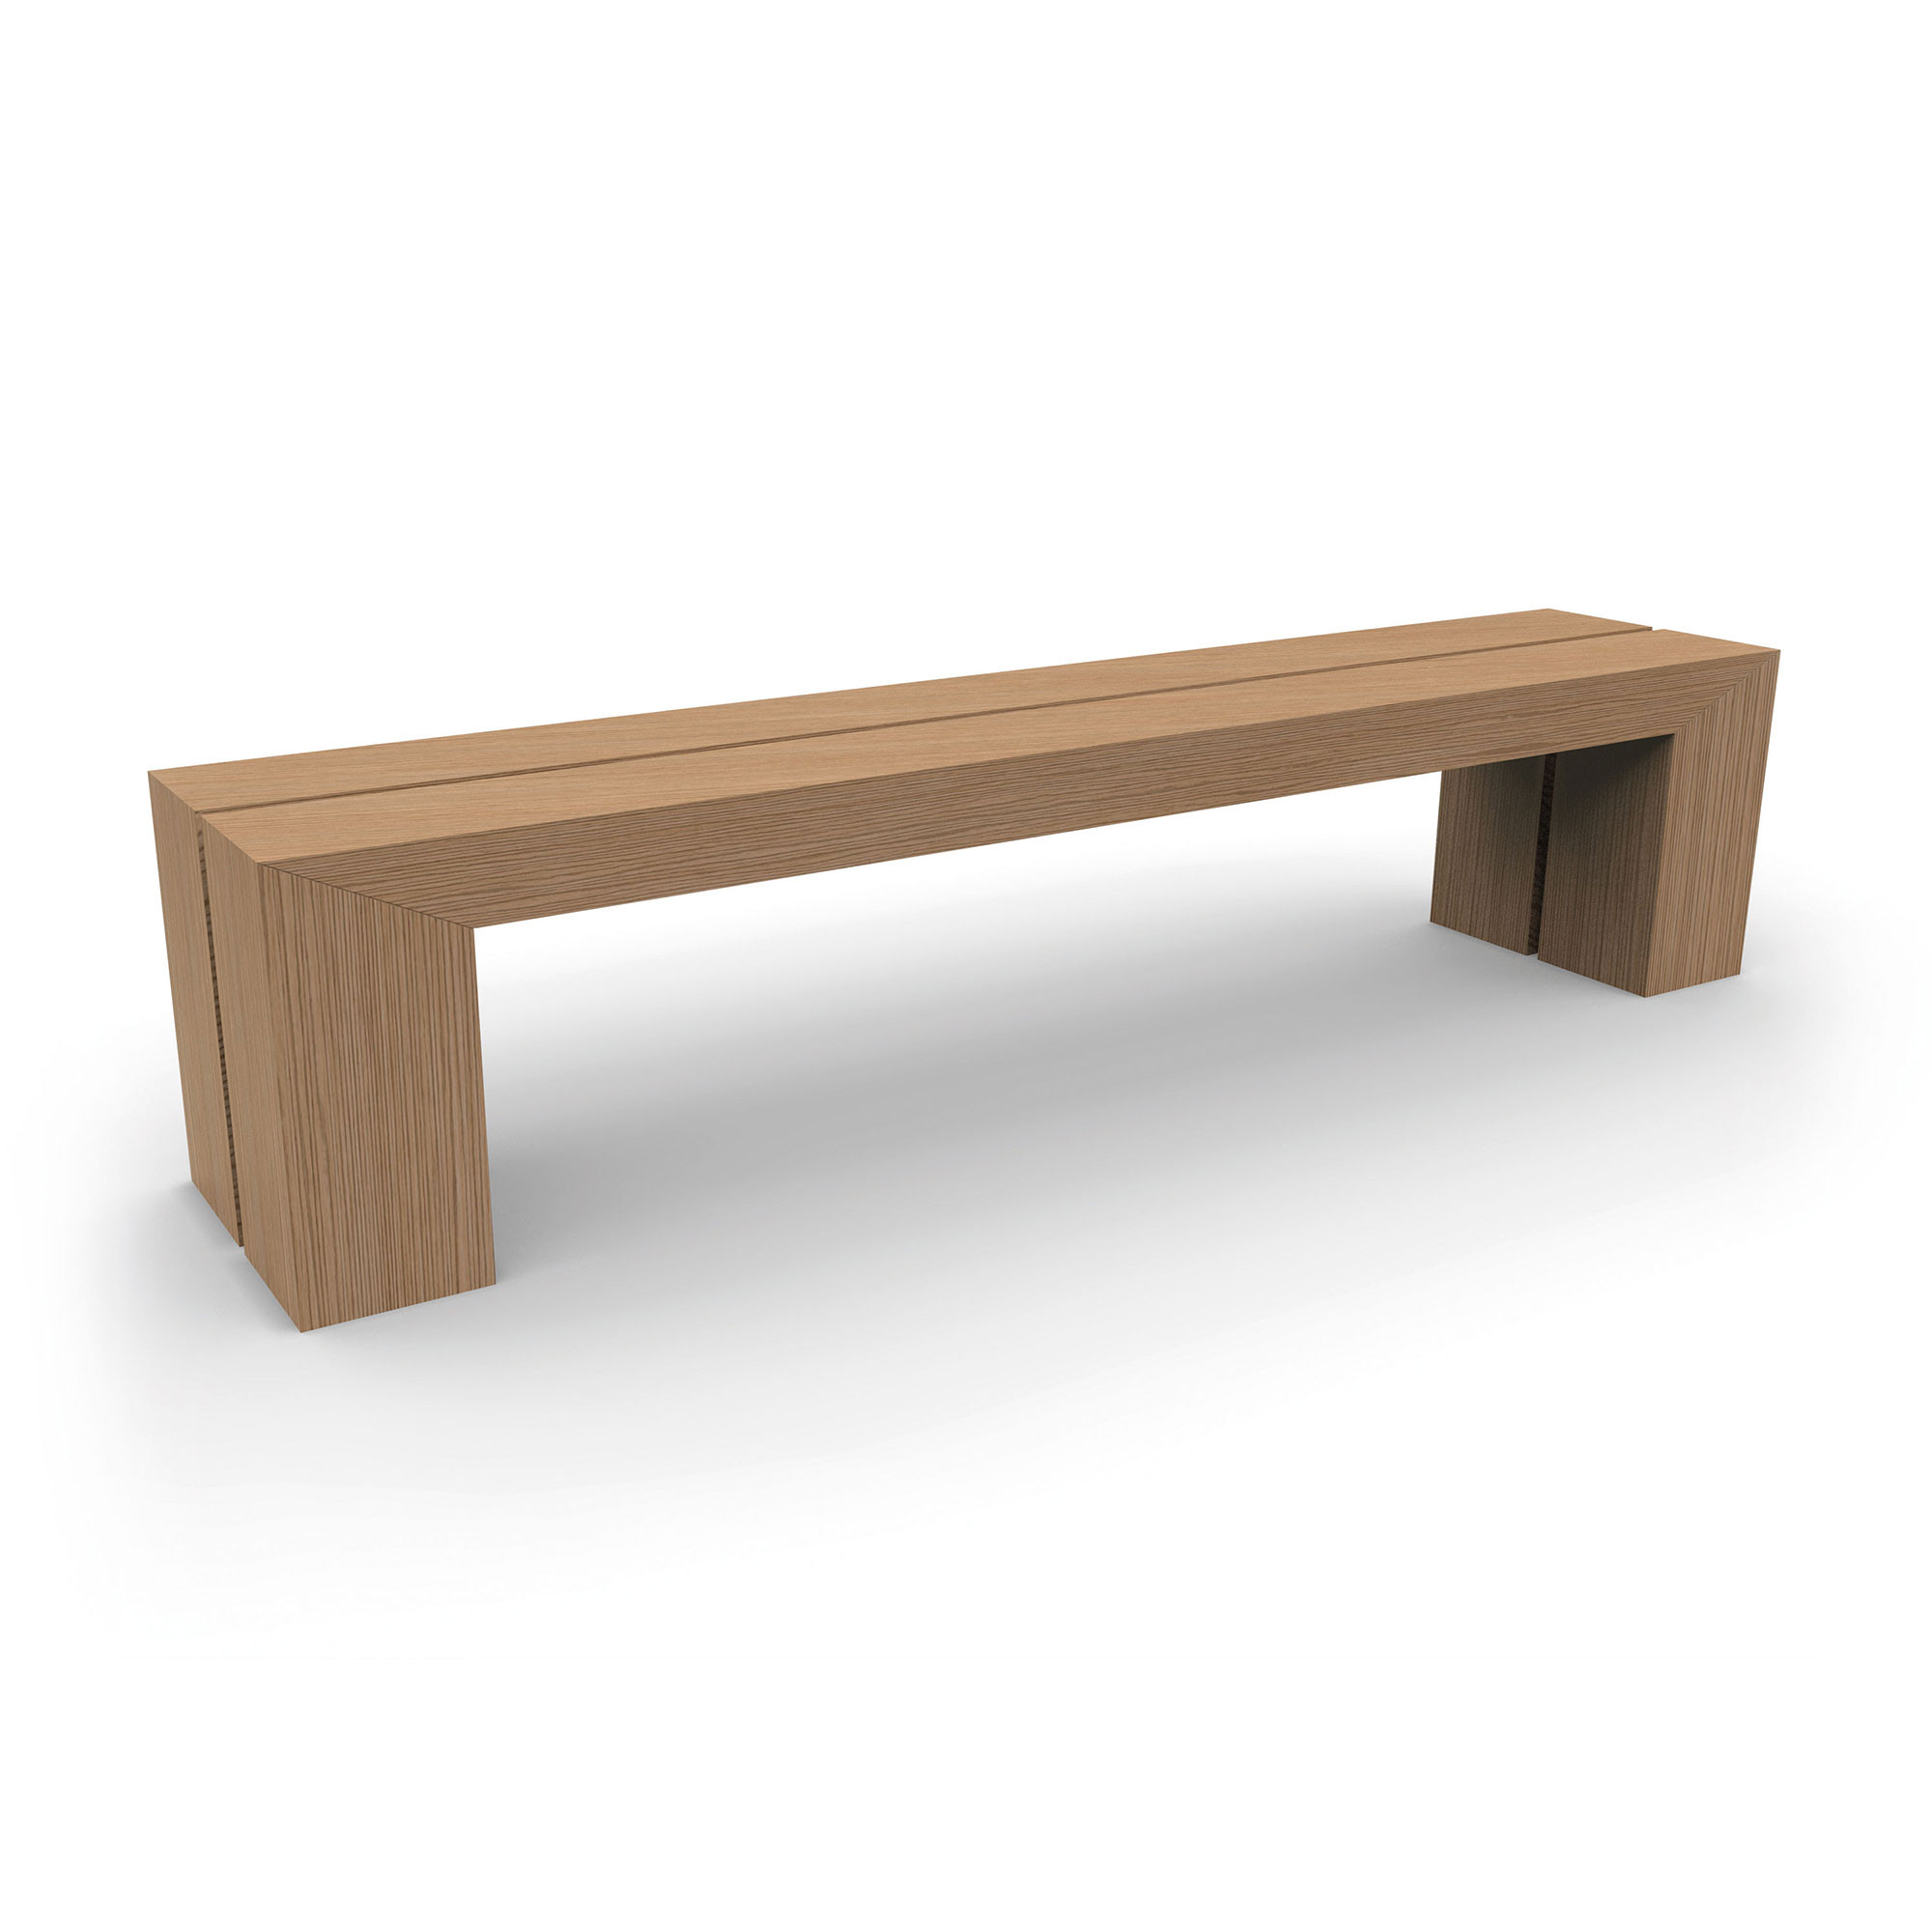 Type 6 Backless Bench